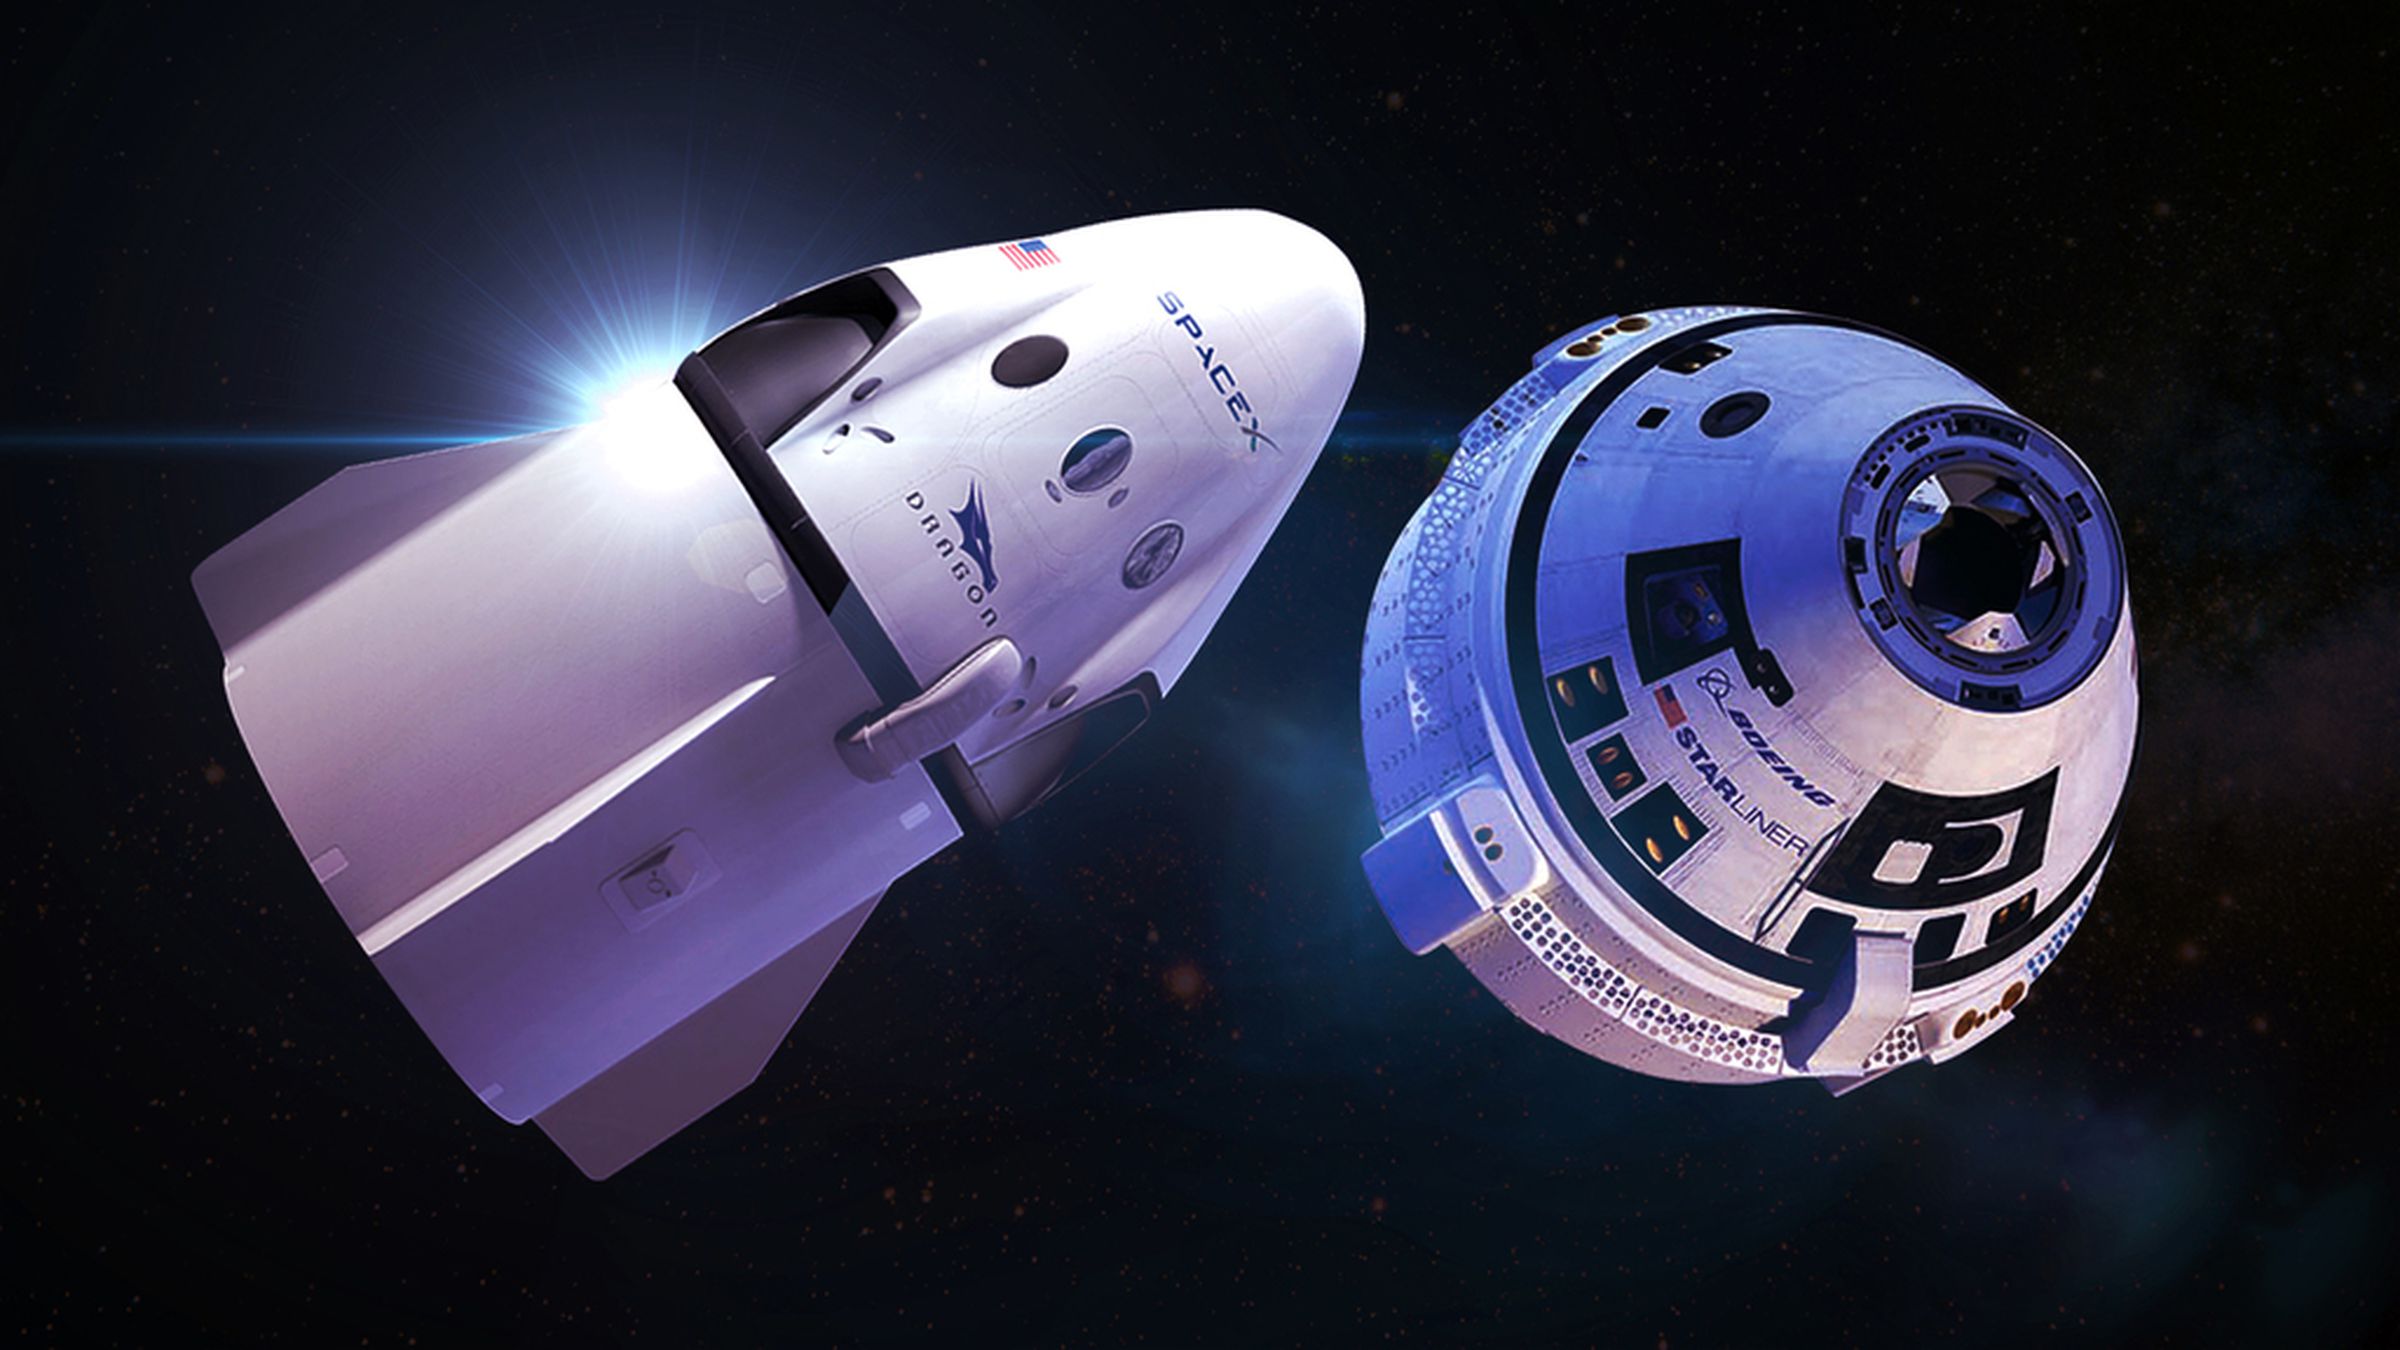 Artistic renderings of the capsules SpaceX and Boeing are developing to send astronauts to space